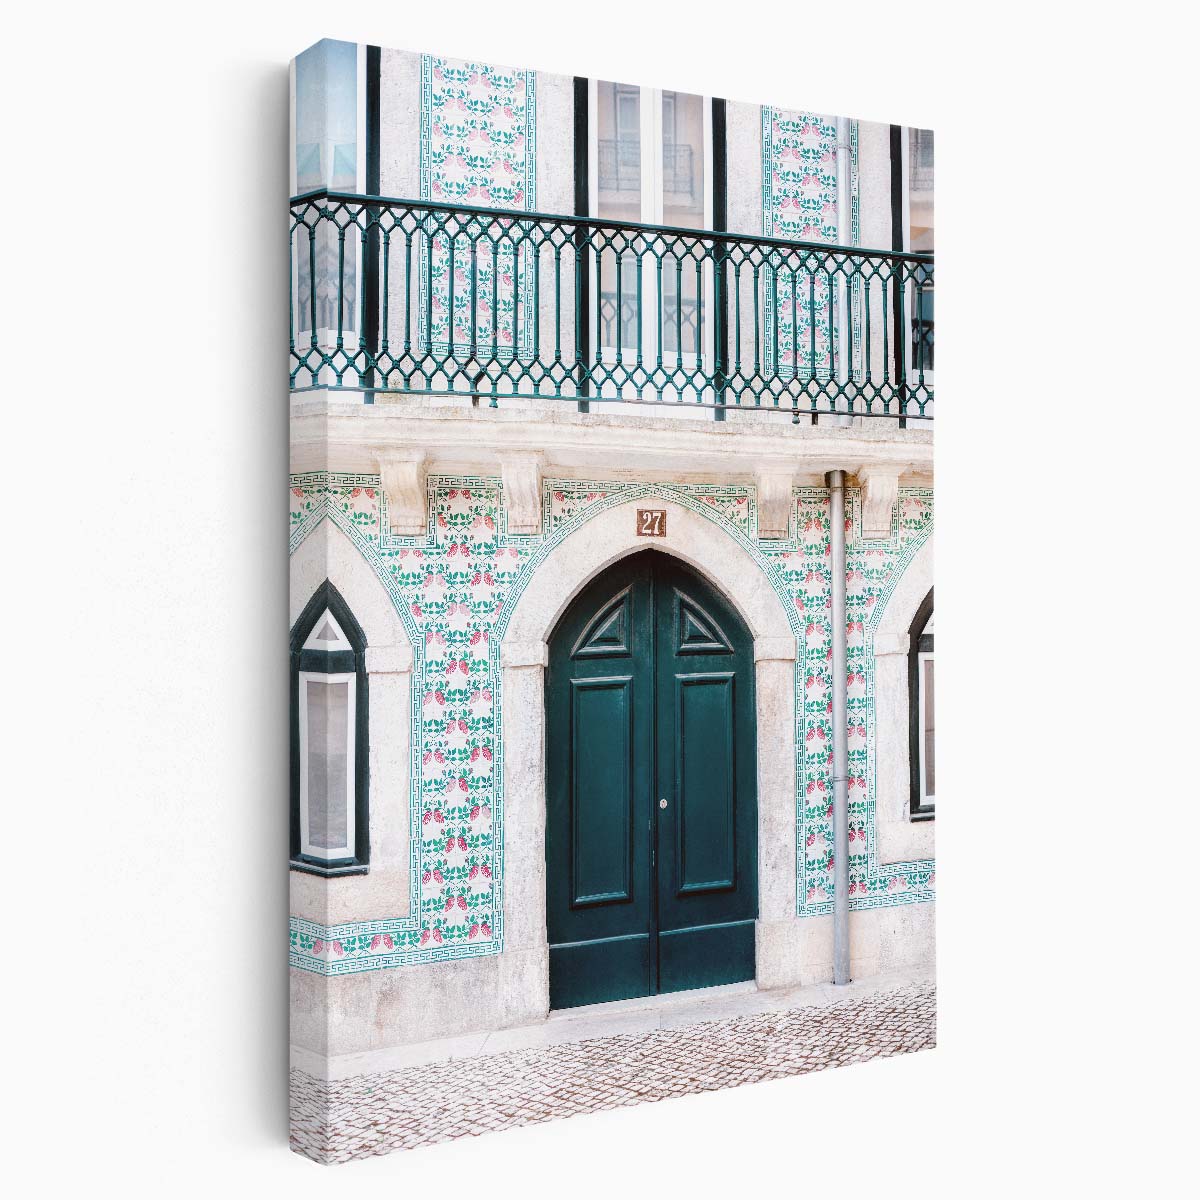 Architecture Photography of Green Door in Lisbon, Portugal by Luxuriance Designs, made in USA